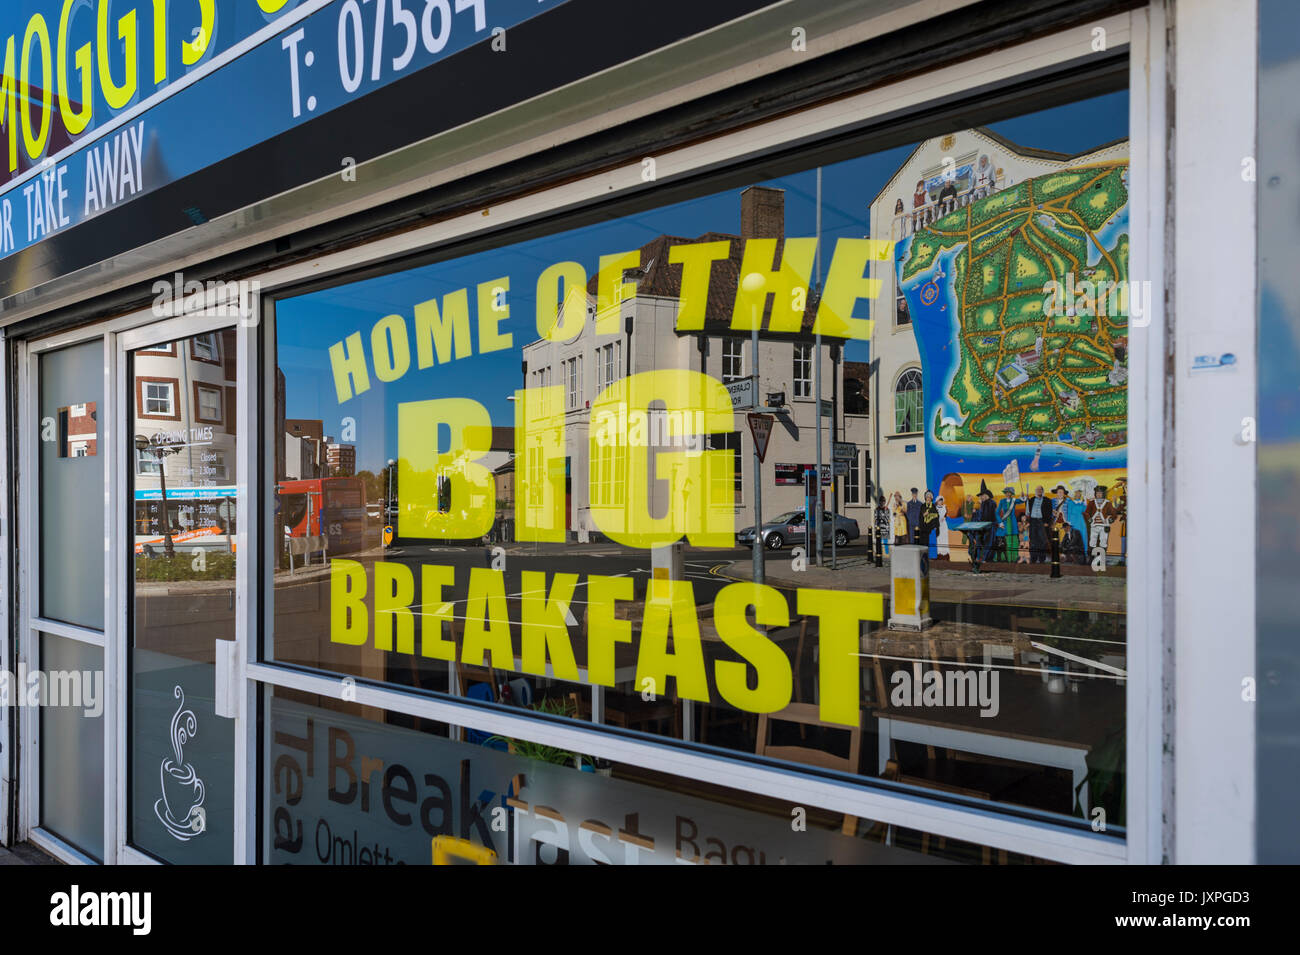 Exterior of a cafe with a sign in the window saying 'Home of the Big Breakfast' Stock Photo